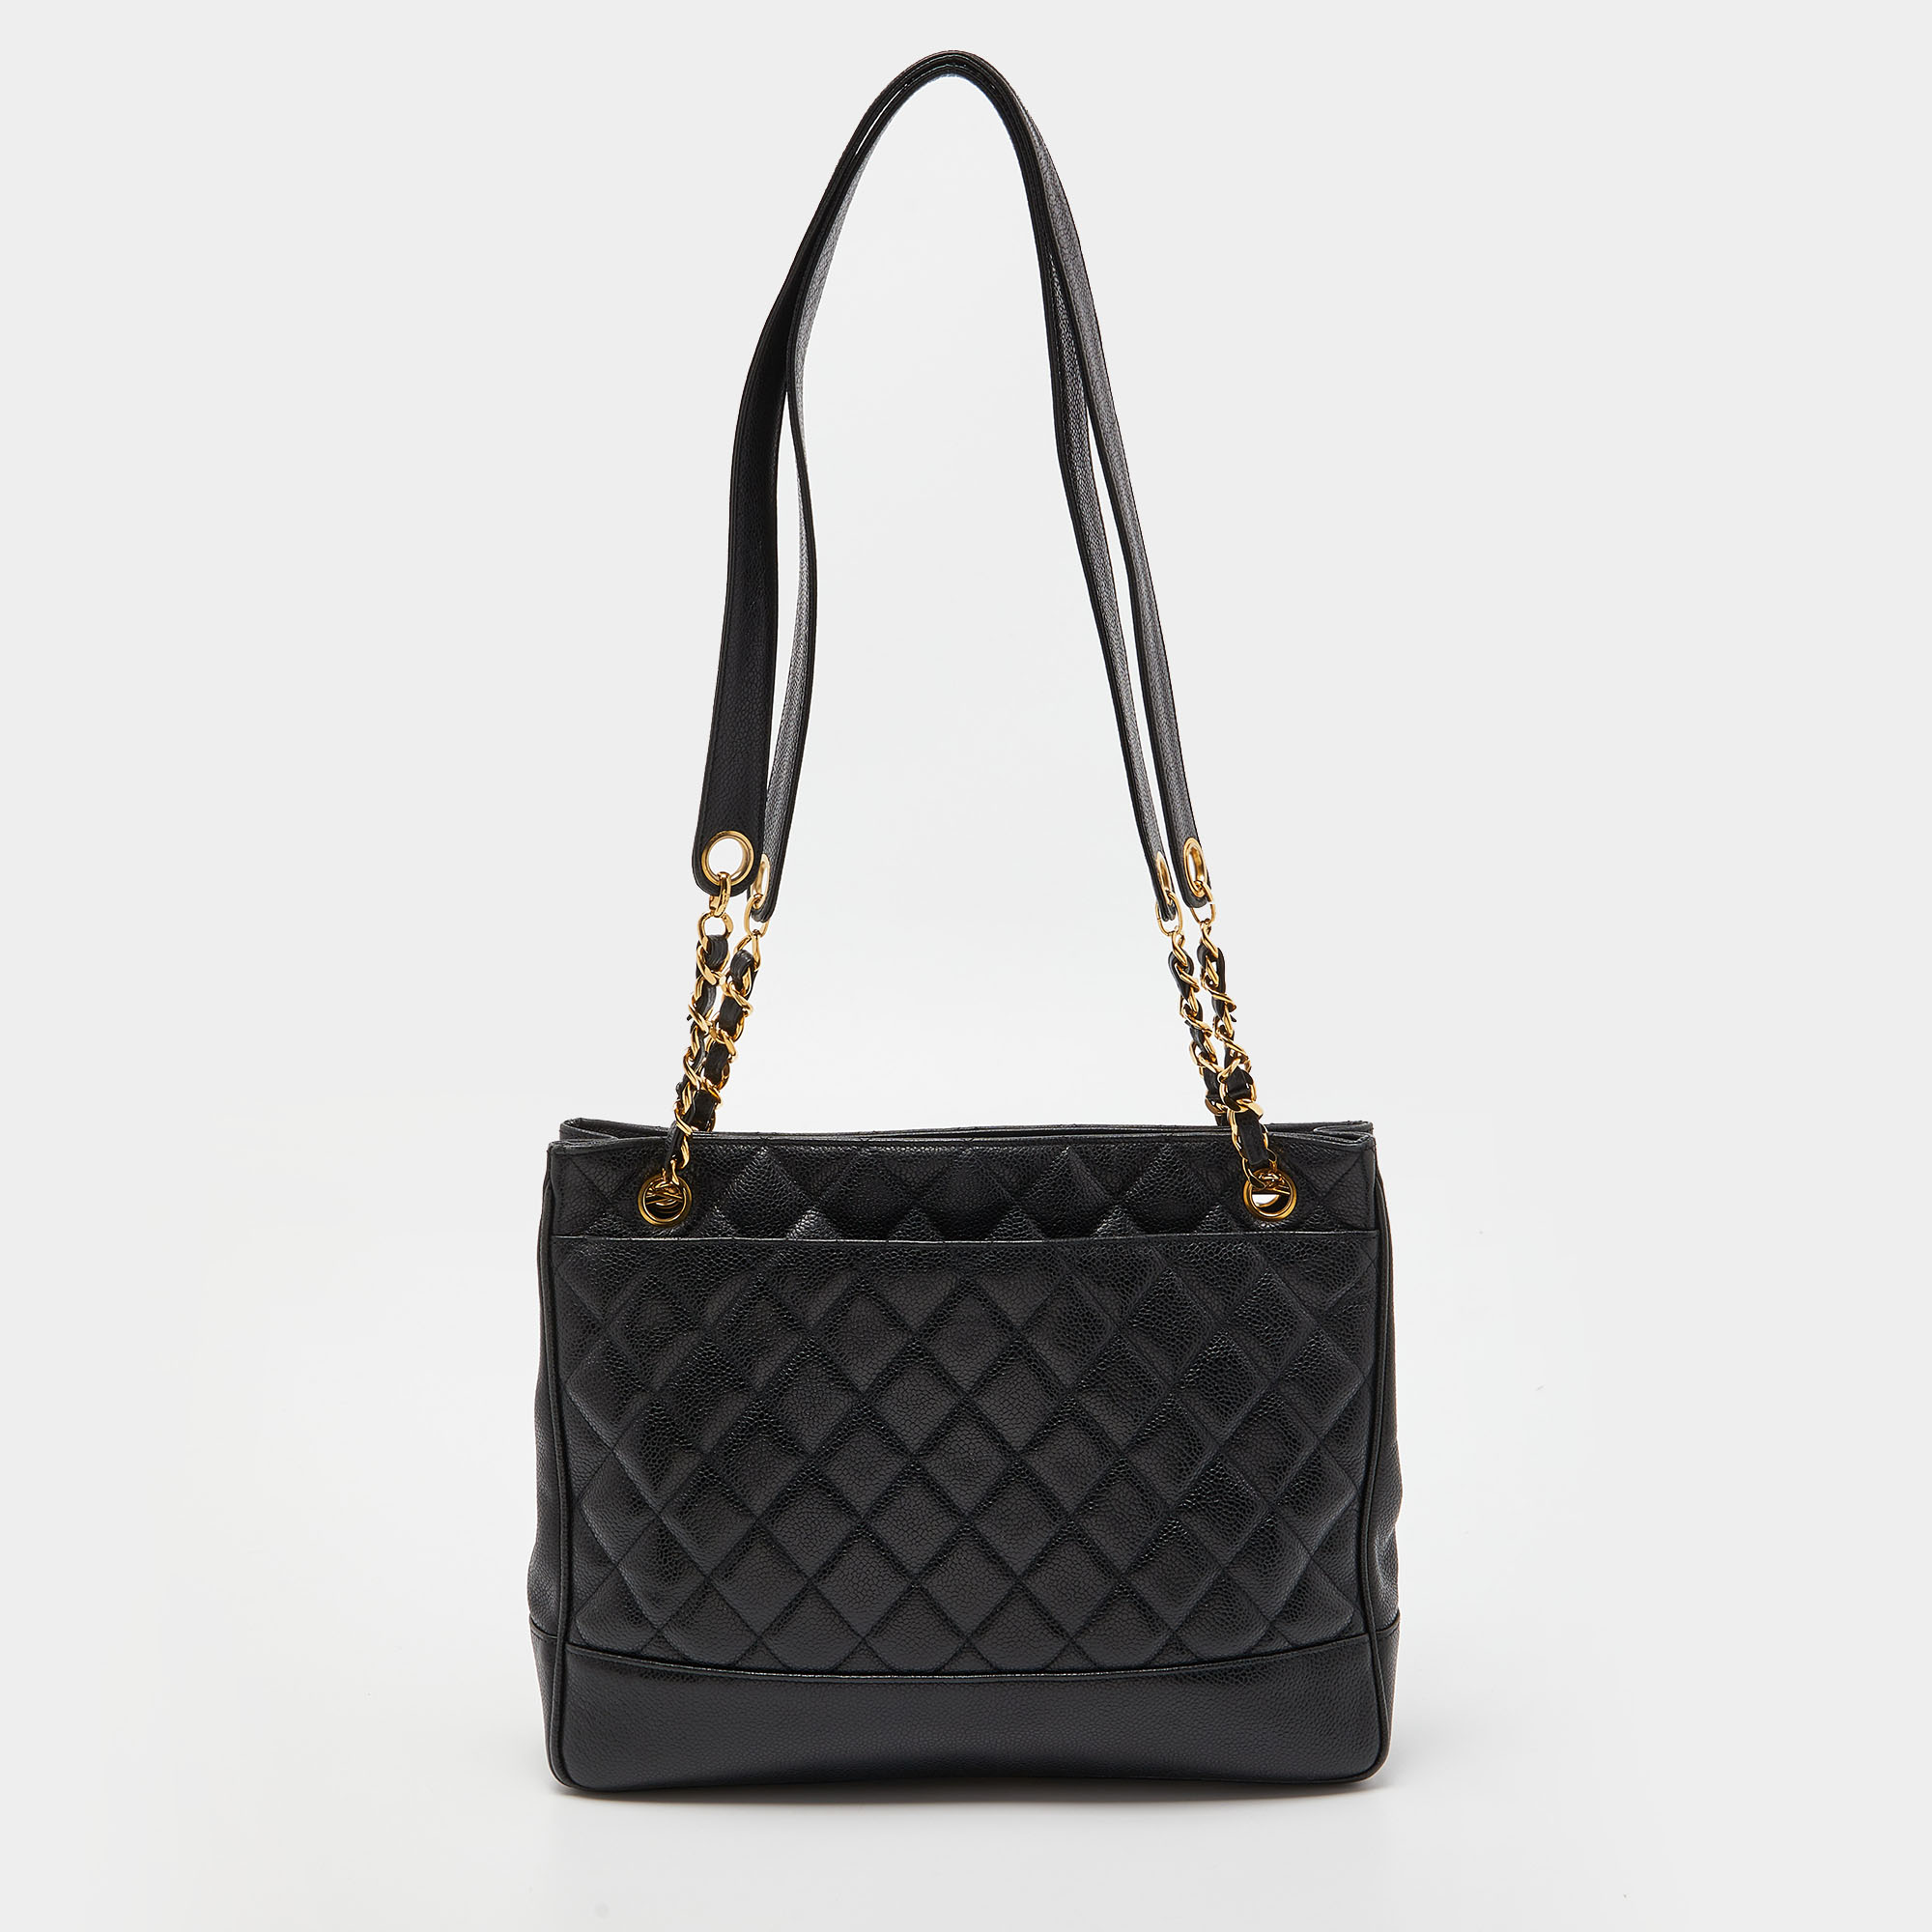 Chanel Black Quilted Caviar Leather Vintage Shopper Tote